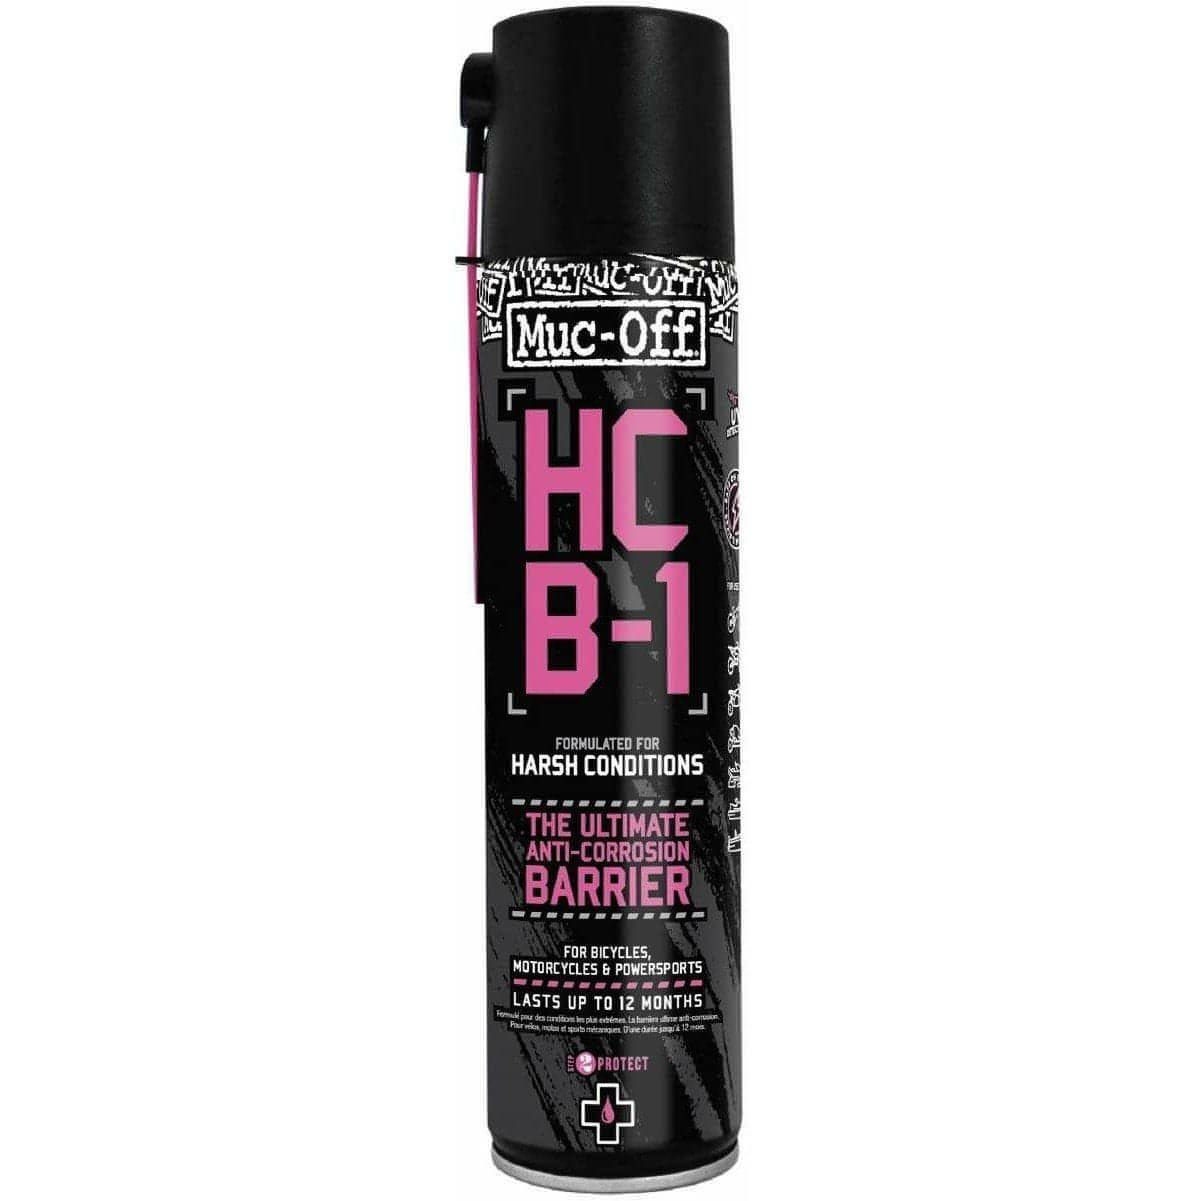 Muc-Off Harsh Conditions Barrier HCB-1 400ml 5037835208672 - Start Fitness